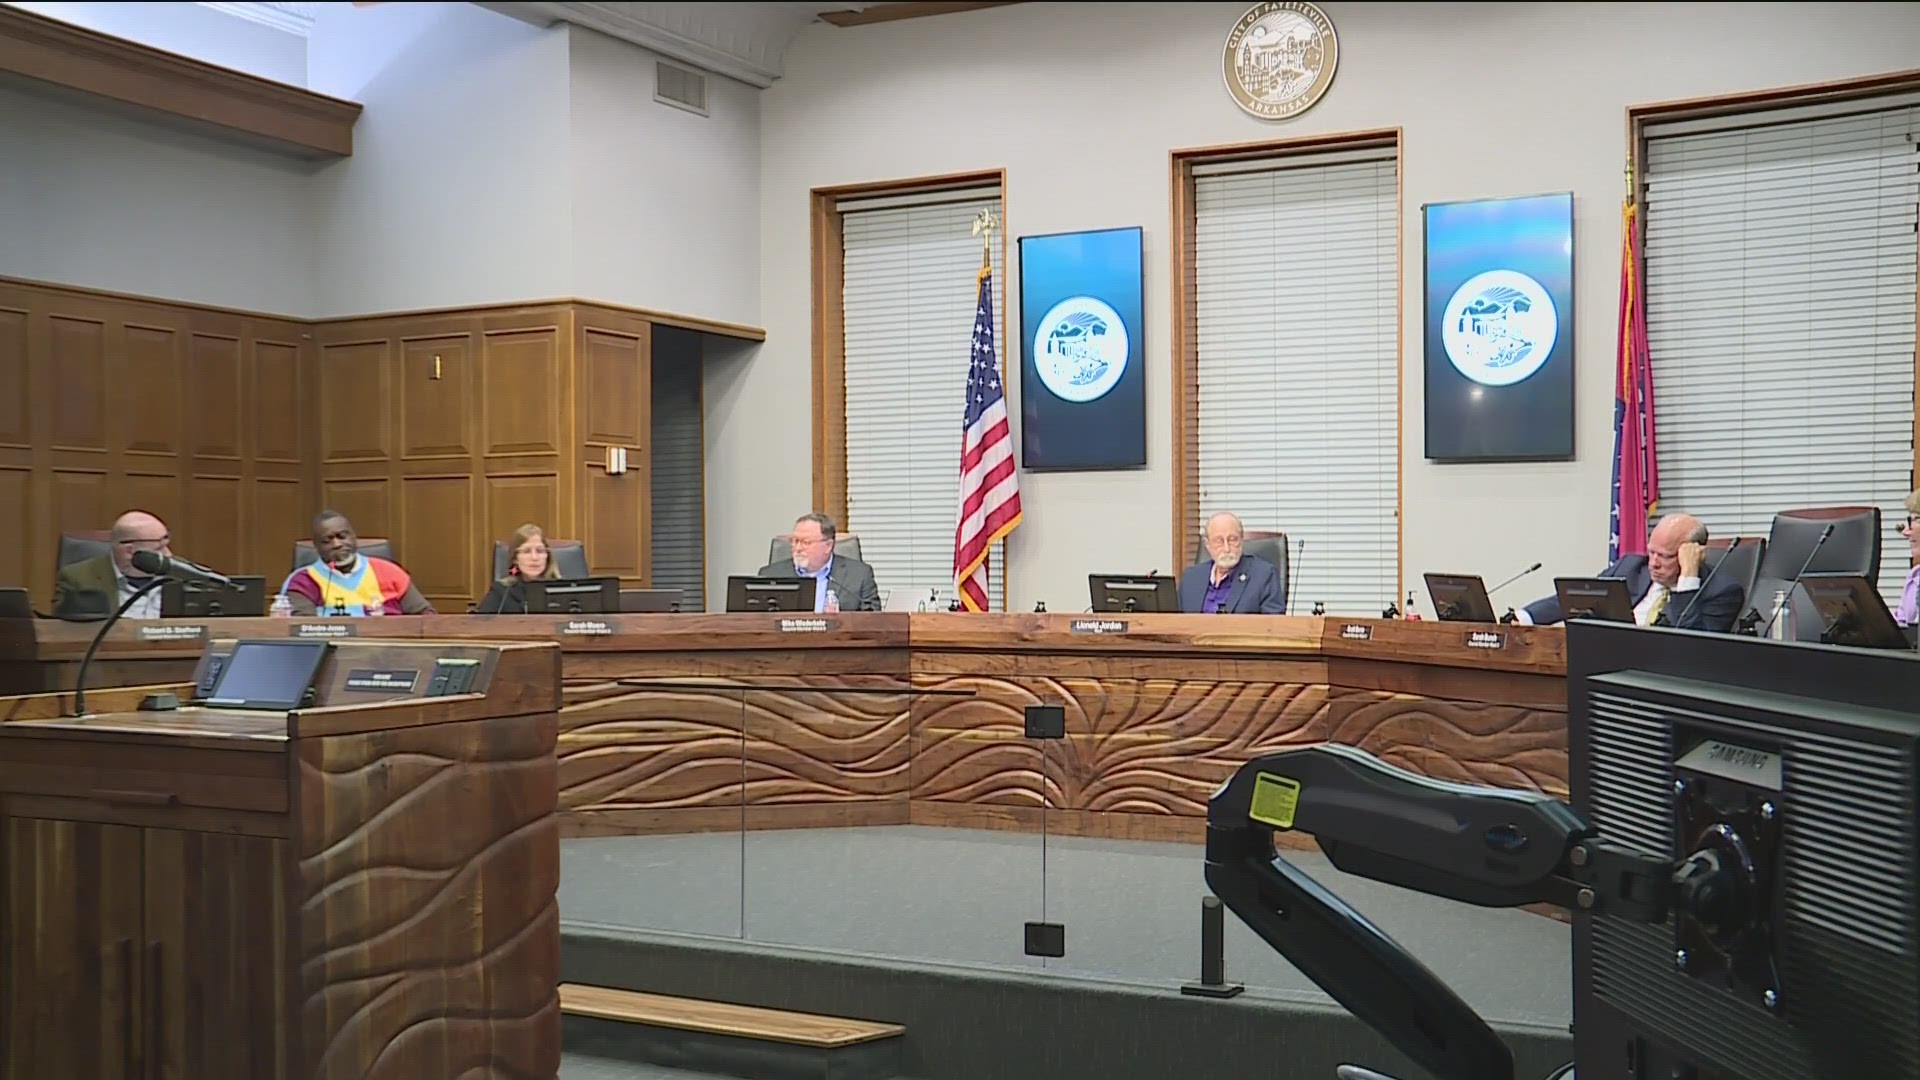 AFTER MULTIPLE MEETINGS, HOURS OF PUBLIC COMMENT, AND A COMBINED RESOLUTION -- FAYETTEVILLE CITY COUNCIL FINALLY DECLARES A HOUSING CRISIS IN THE CITY...